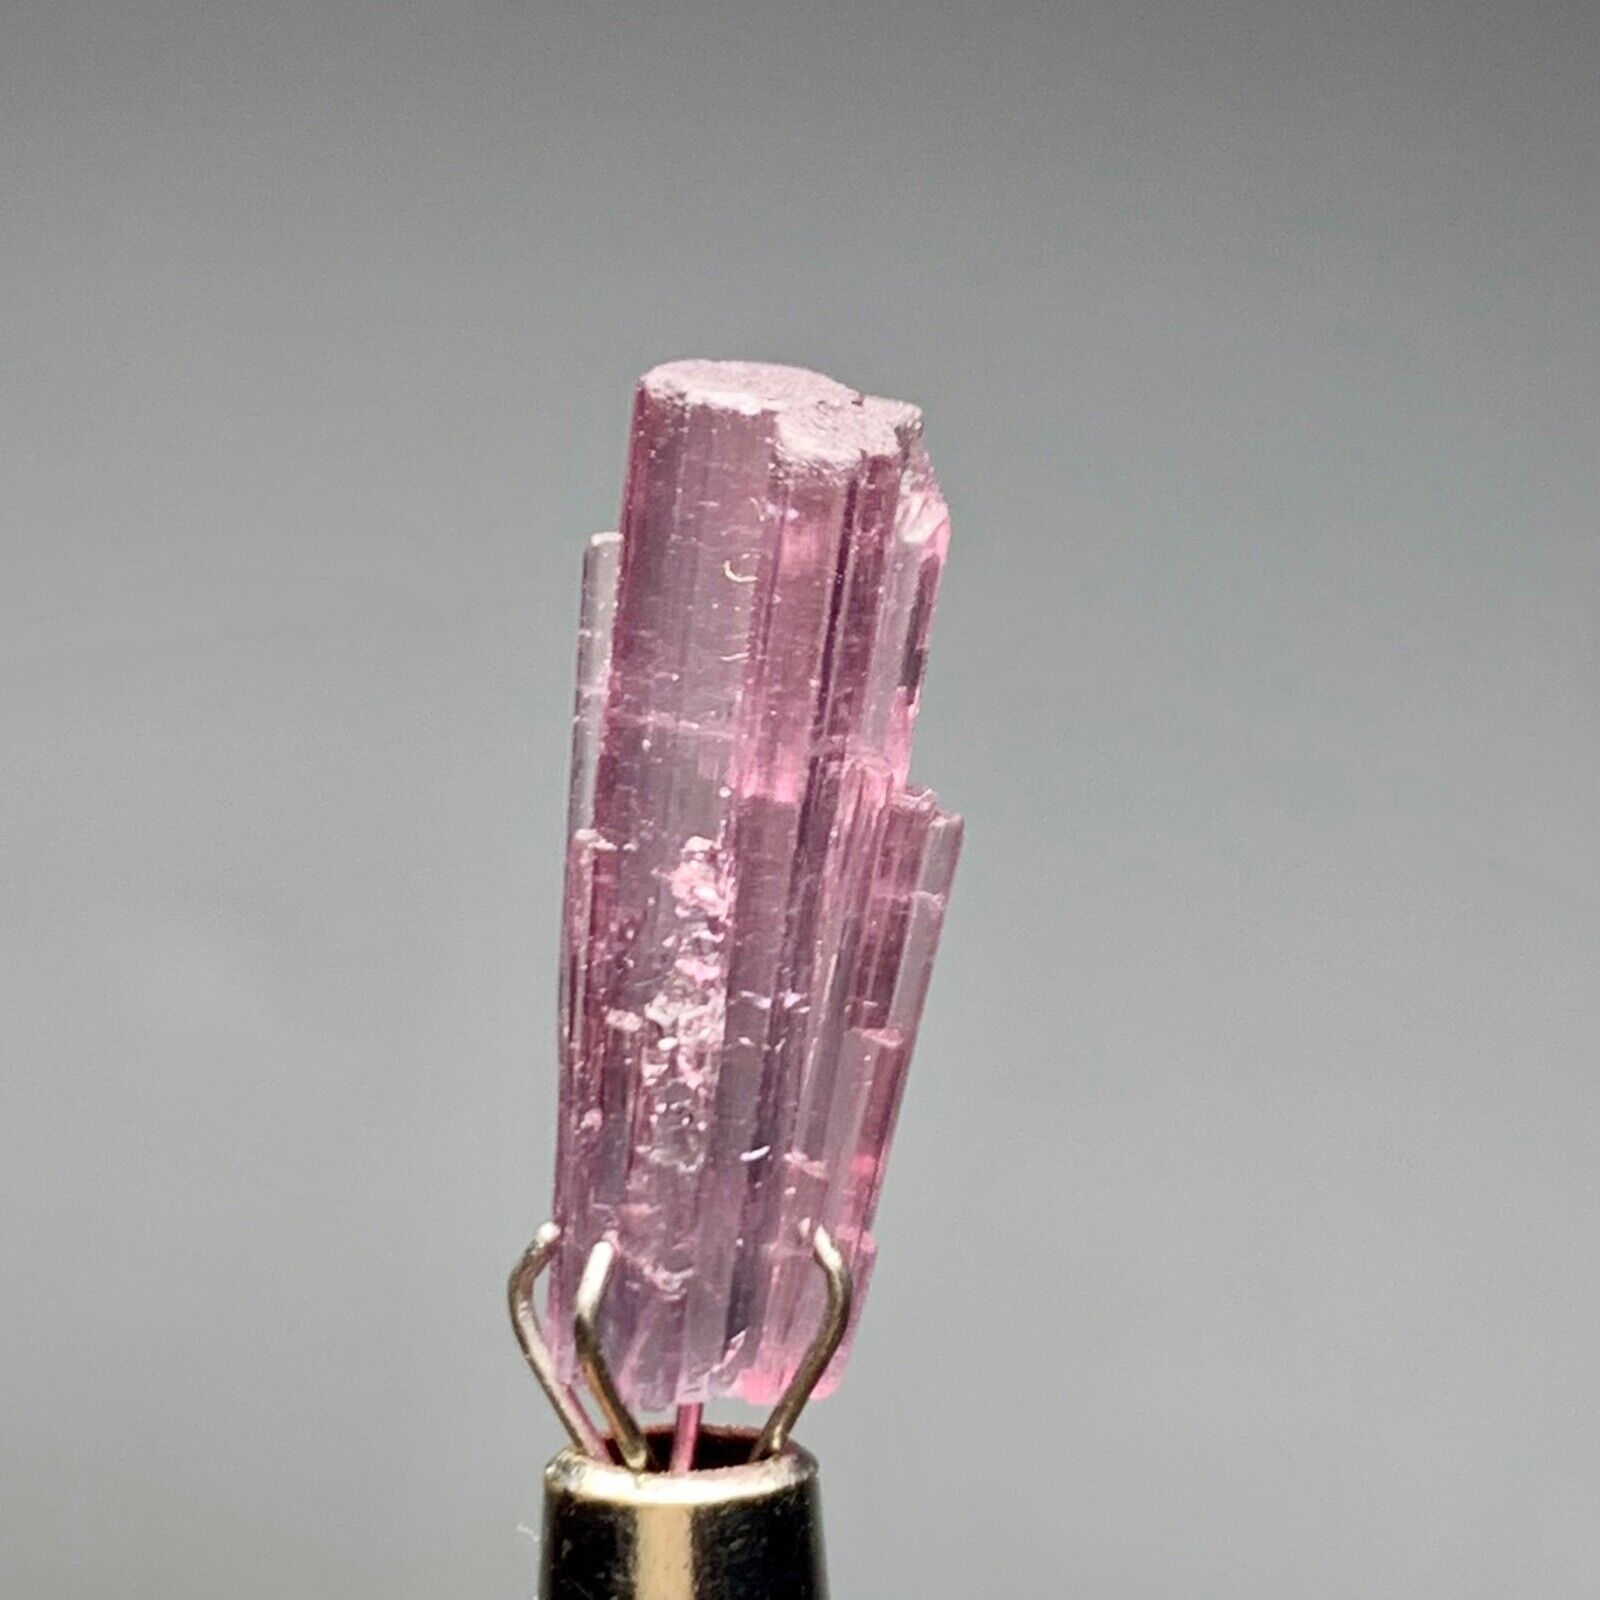 5 Cts Beautiful Top Quality Terminated pink Tourmaline Crystal  from Afghanistan